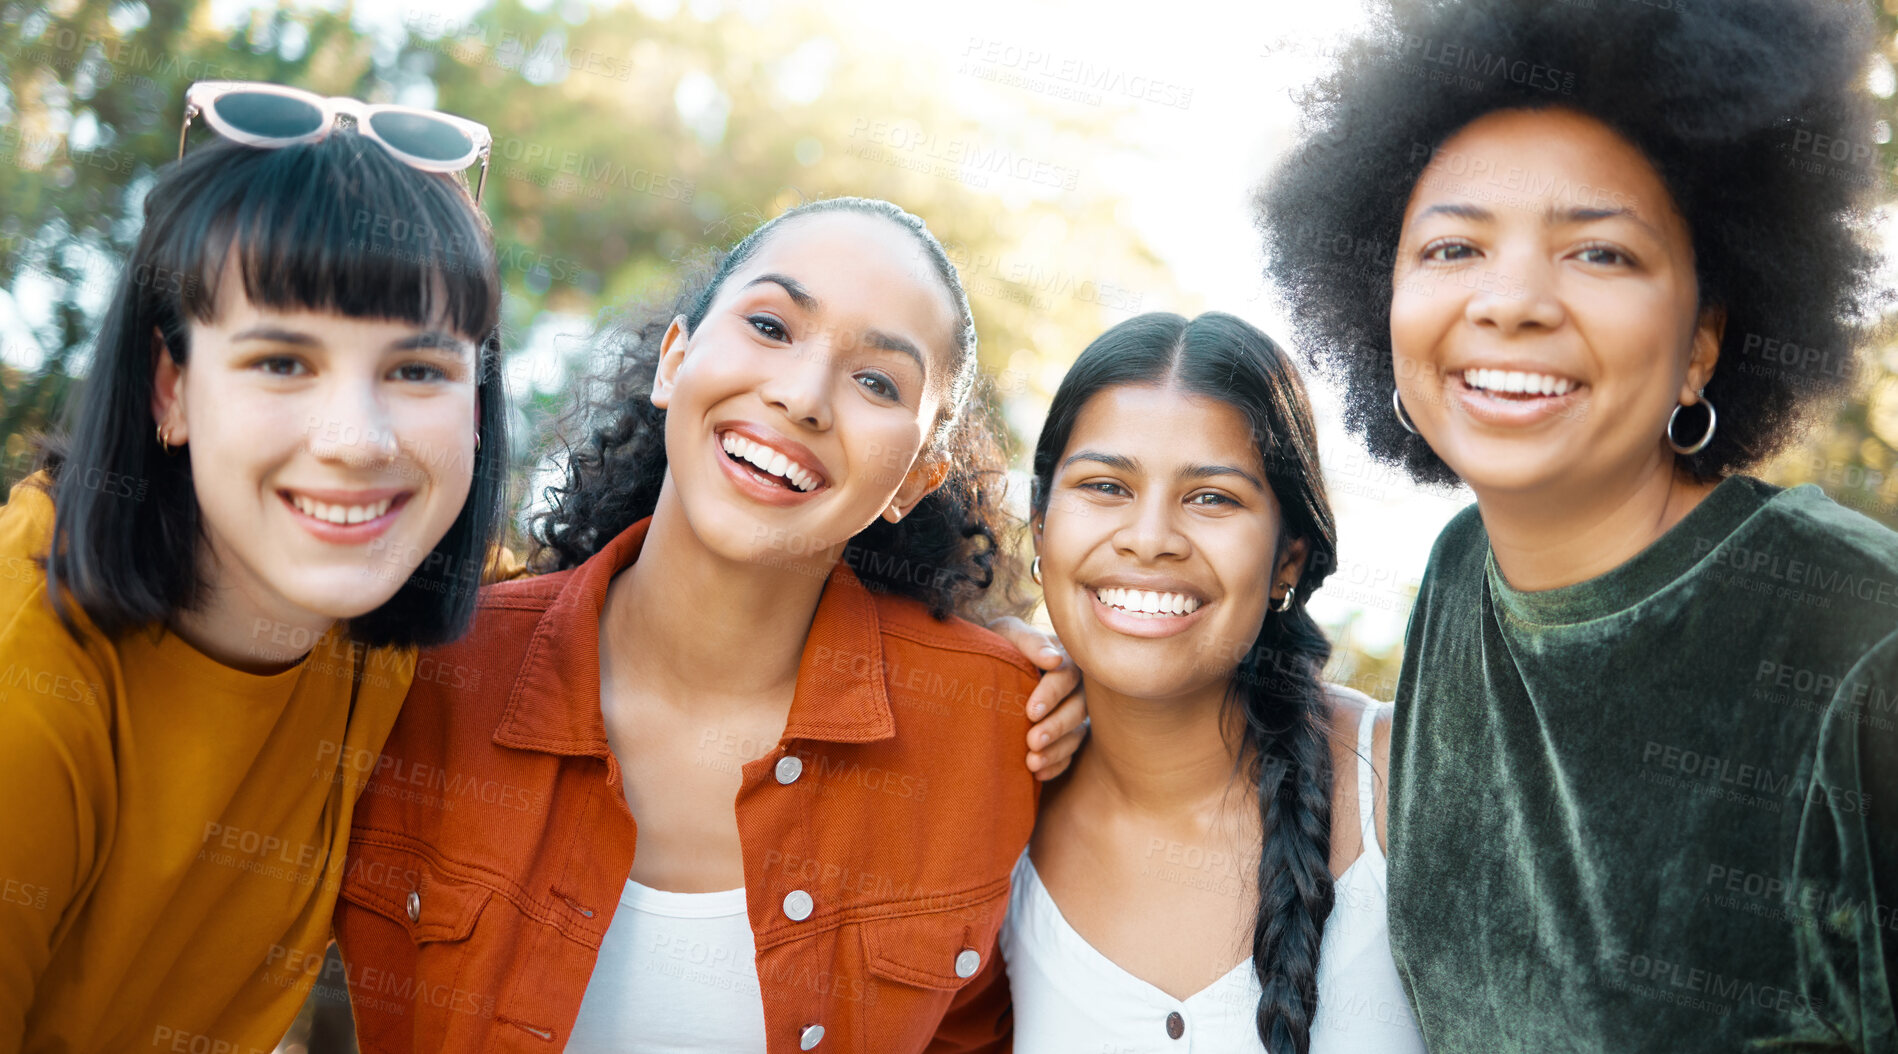 Buy stock photo Shot of a group of female friends spending time together at a park